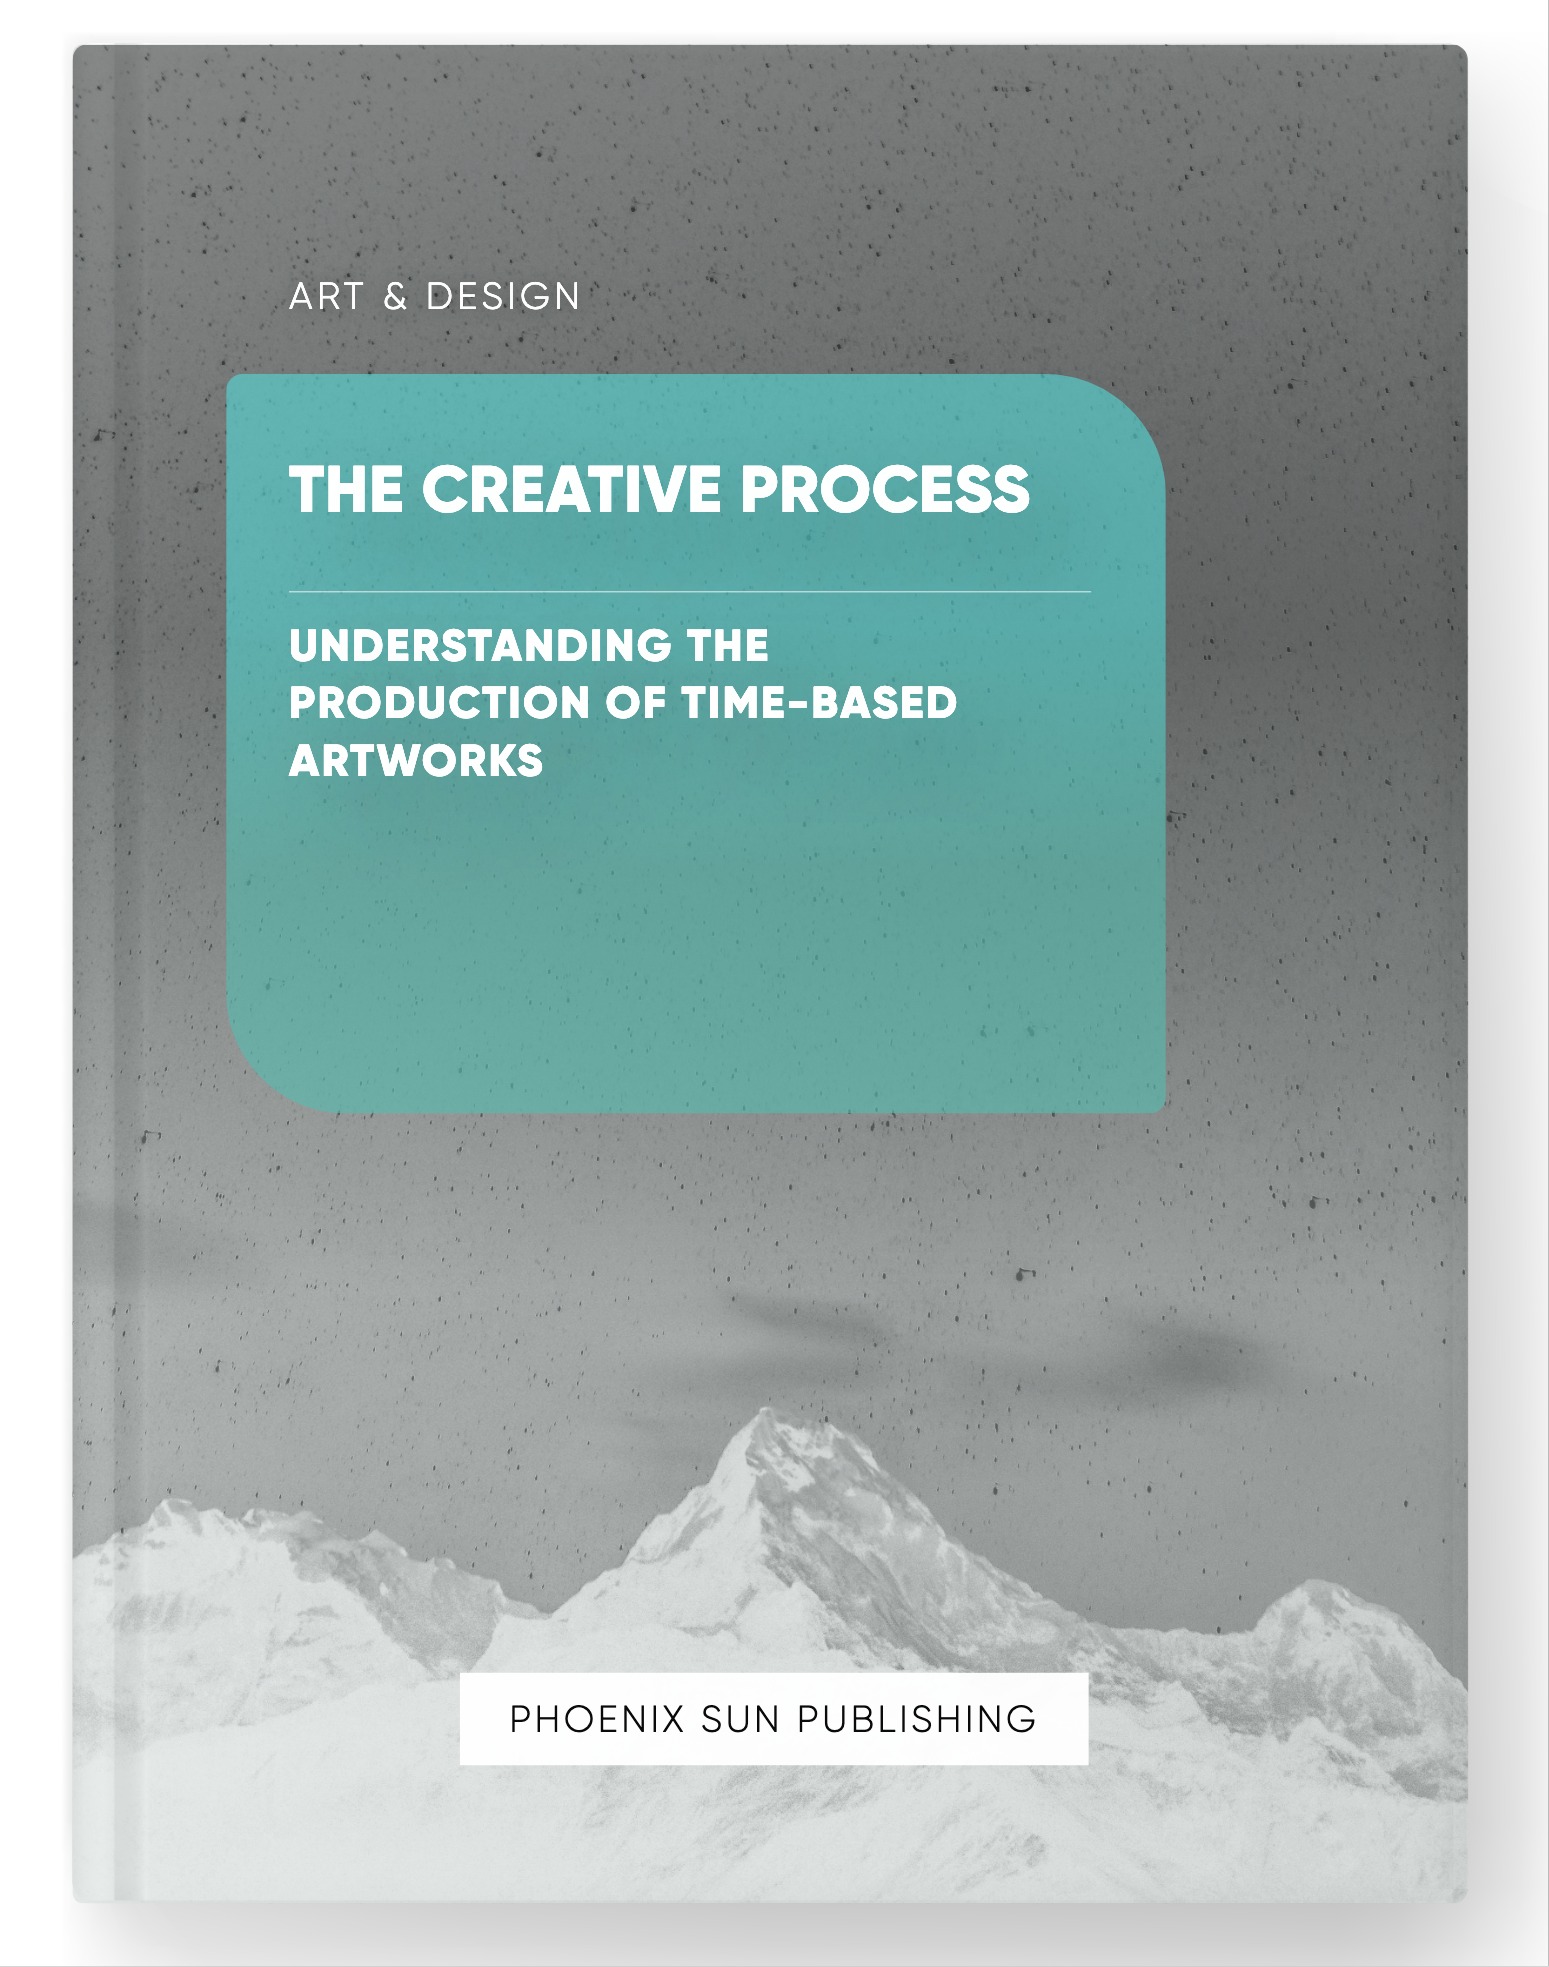 The Creative Process – Understanding the Production of Time-based Artworks